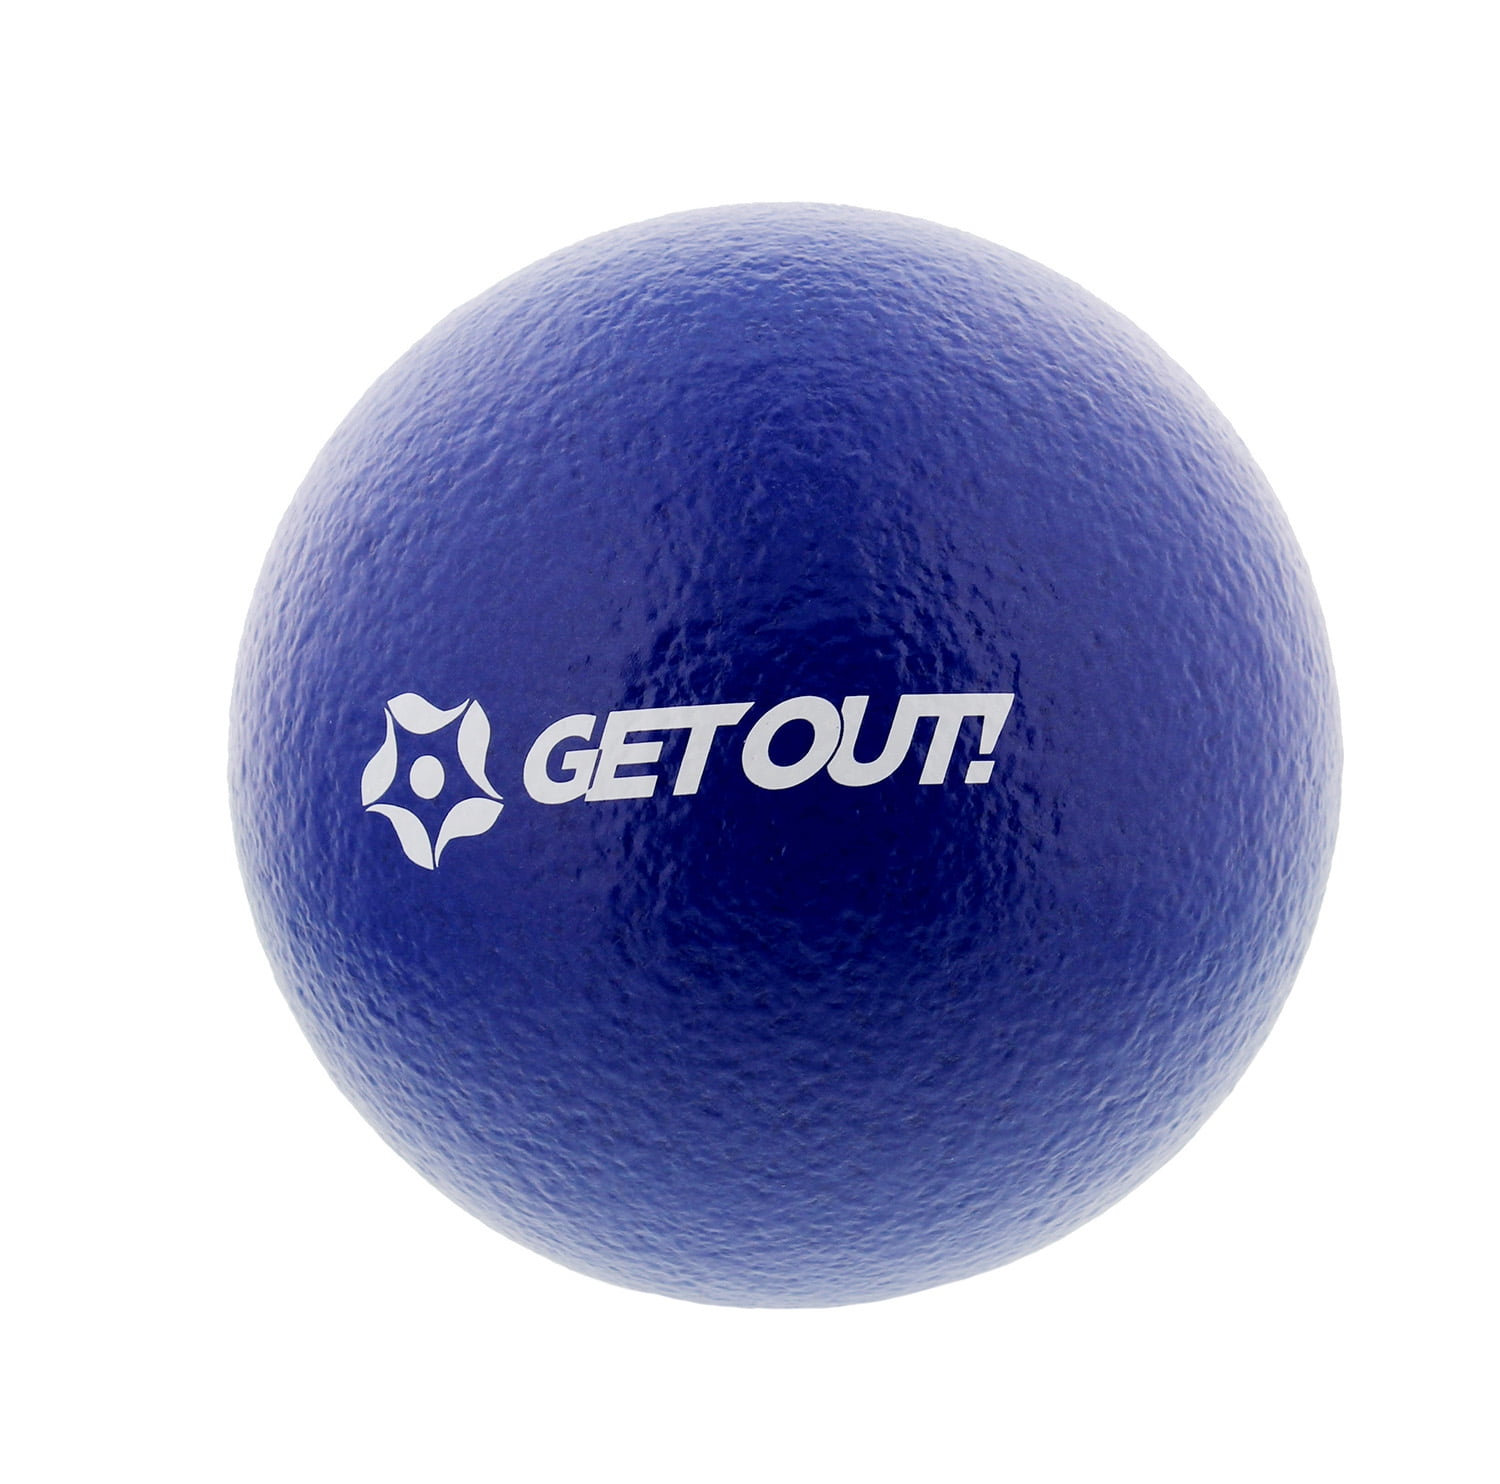 Get Out 6pk Latex-Free 6 Inch Playground Balls in Red Soft Dodgeball Balls 